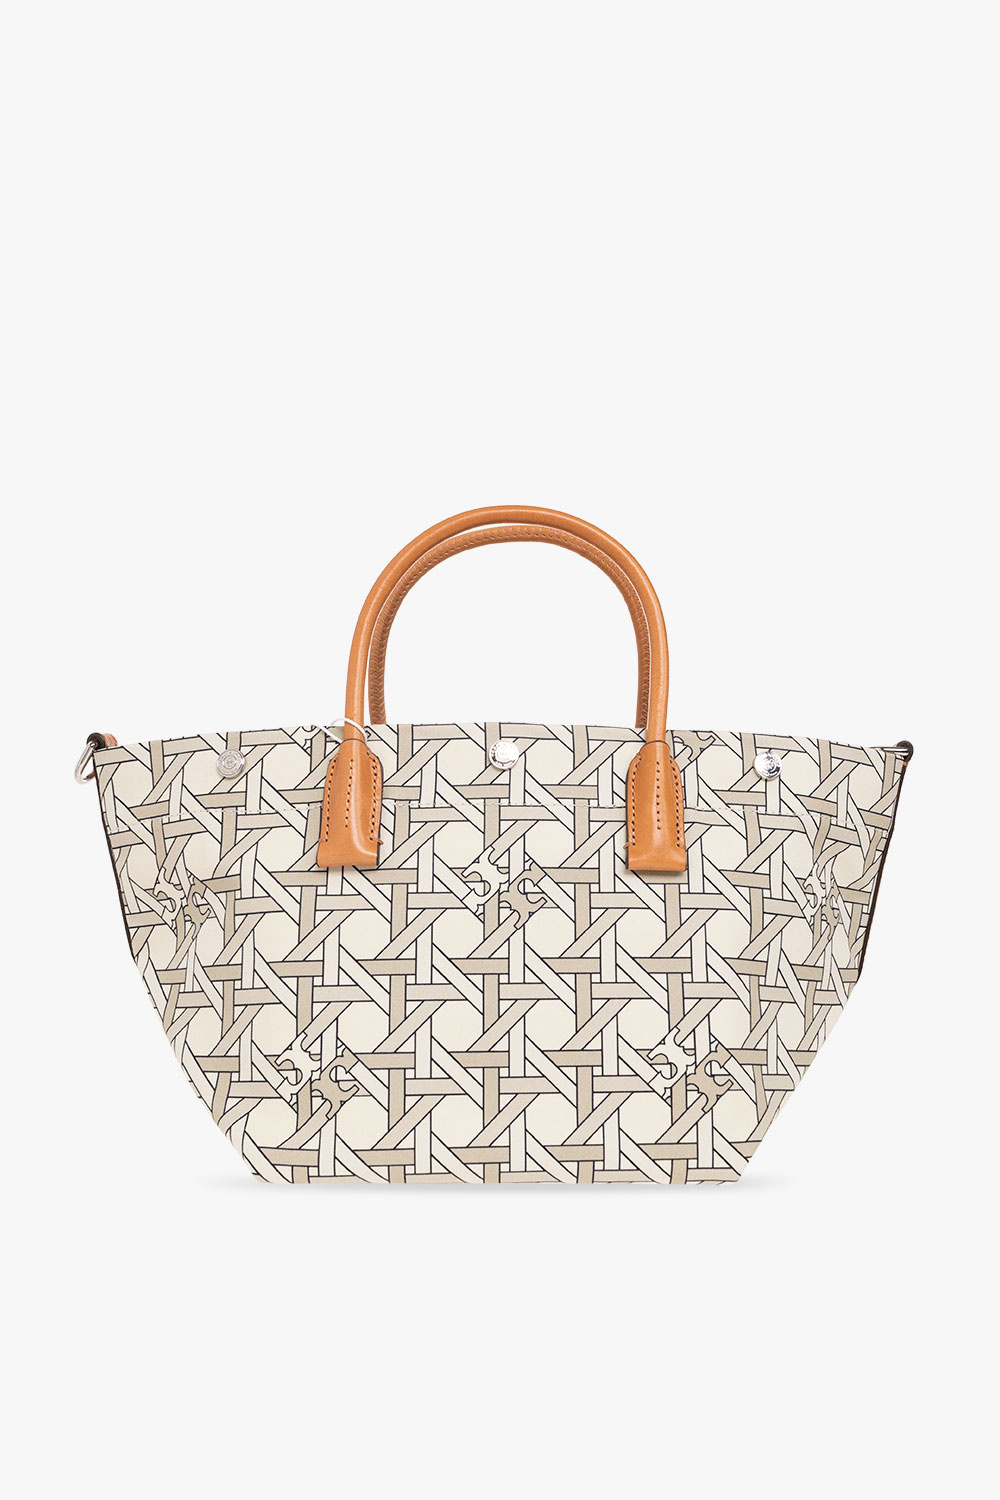 Tory Burch Women's Canvas Basketweave Small Tote